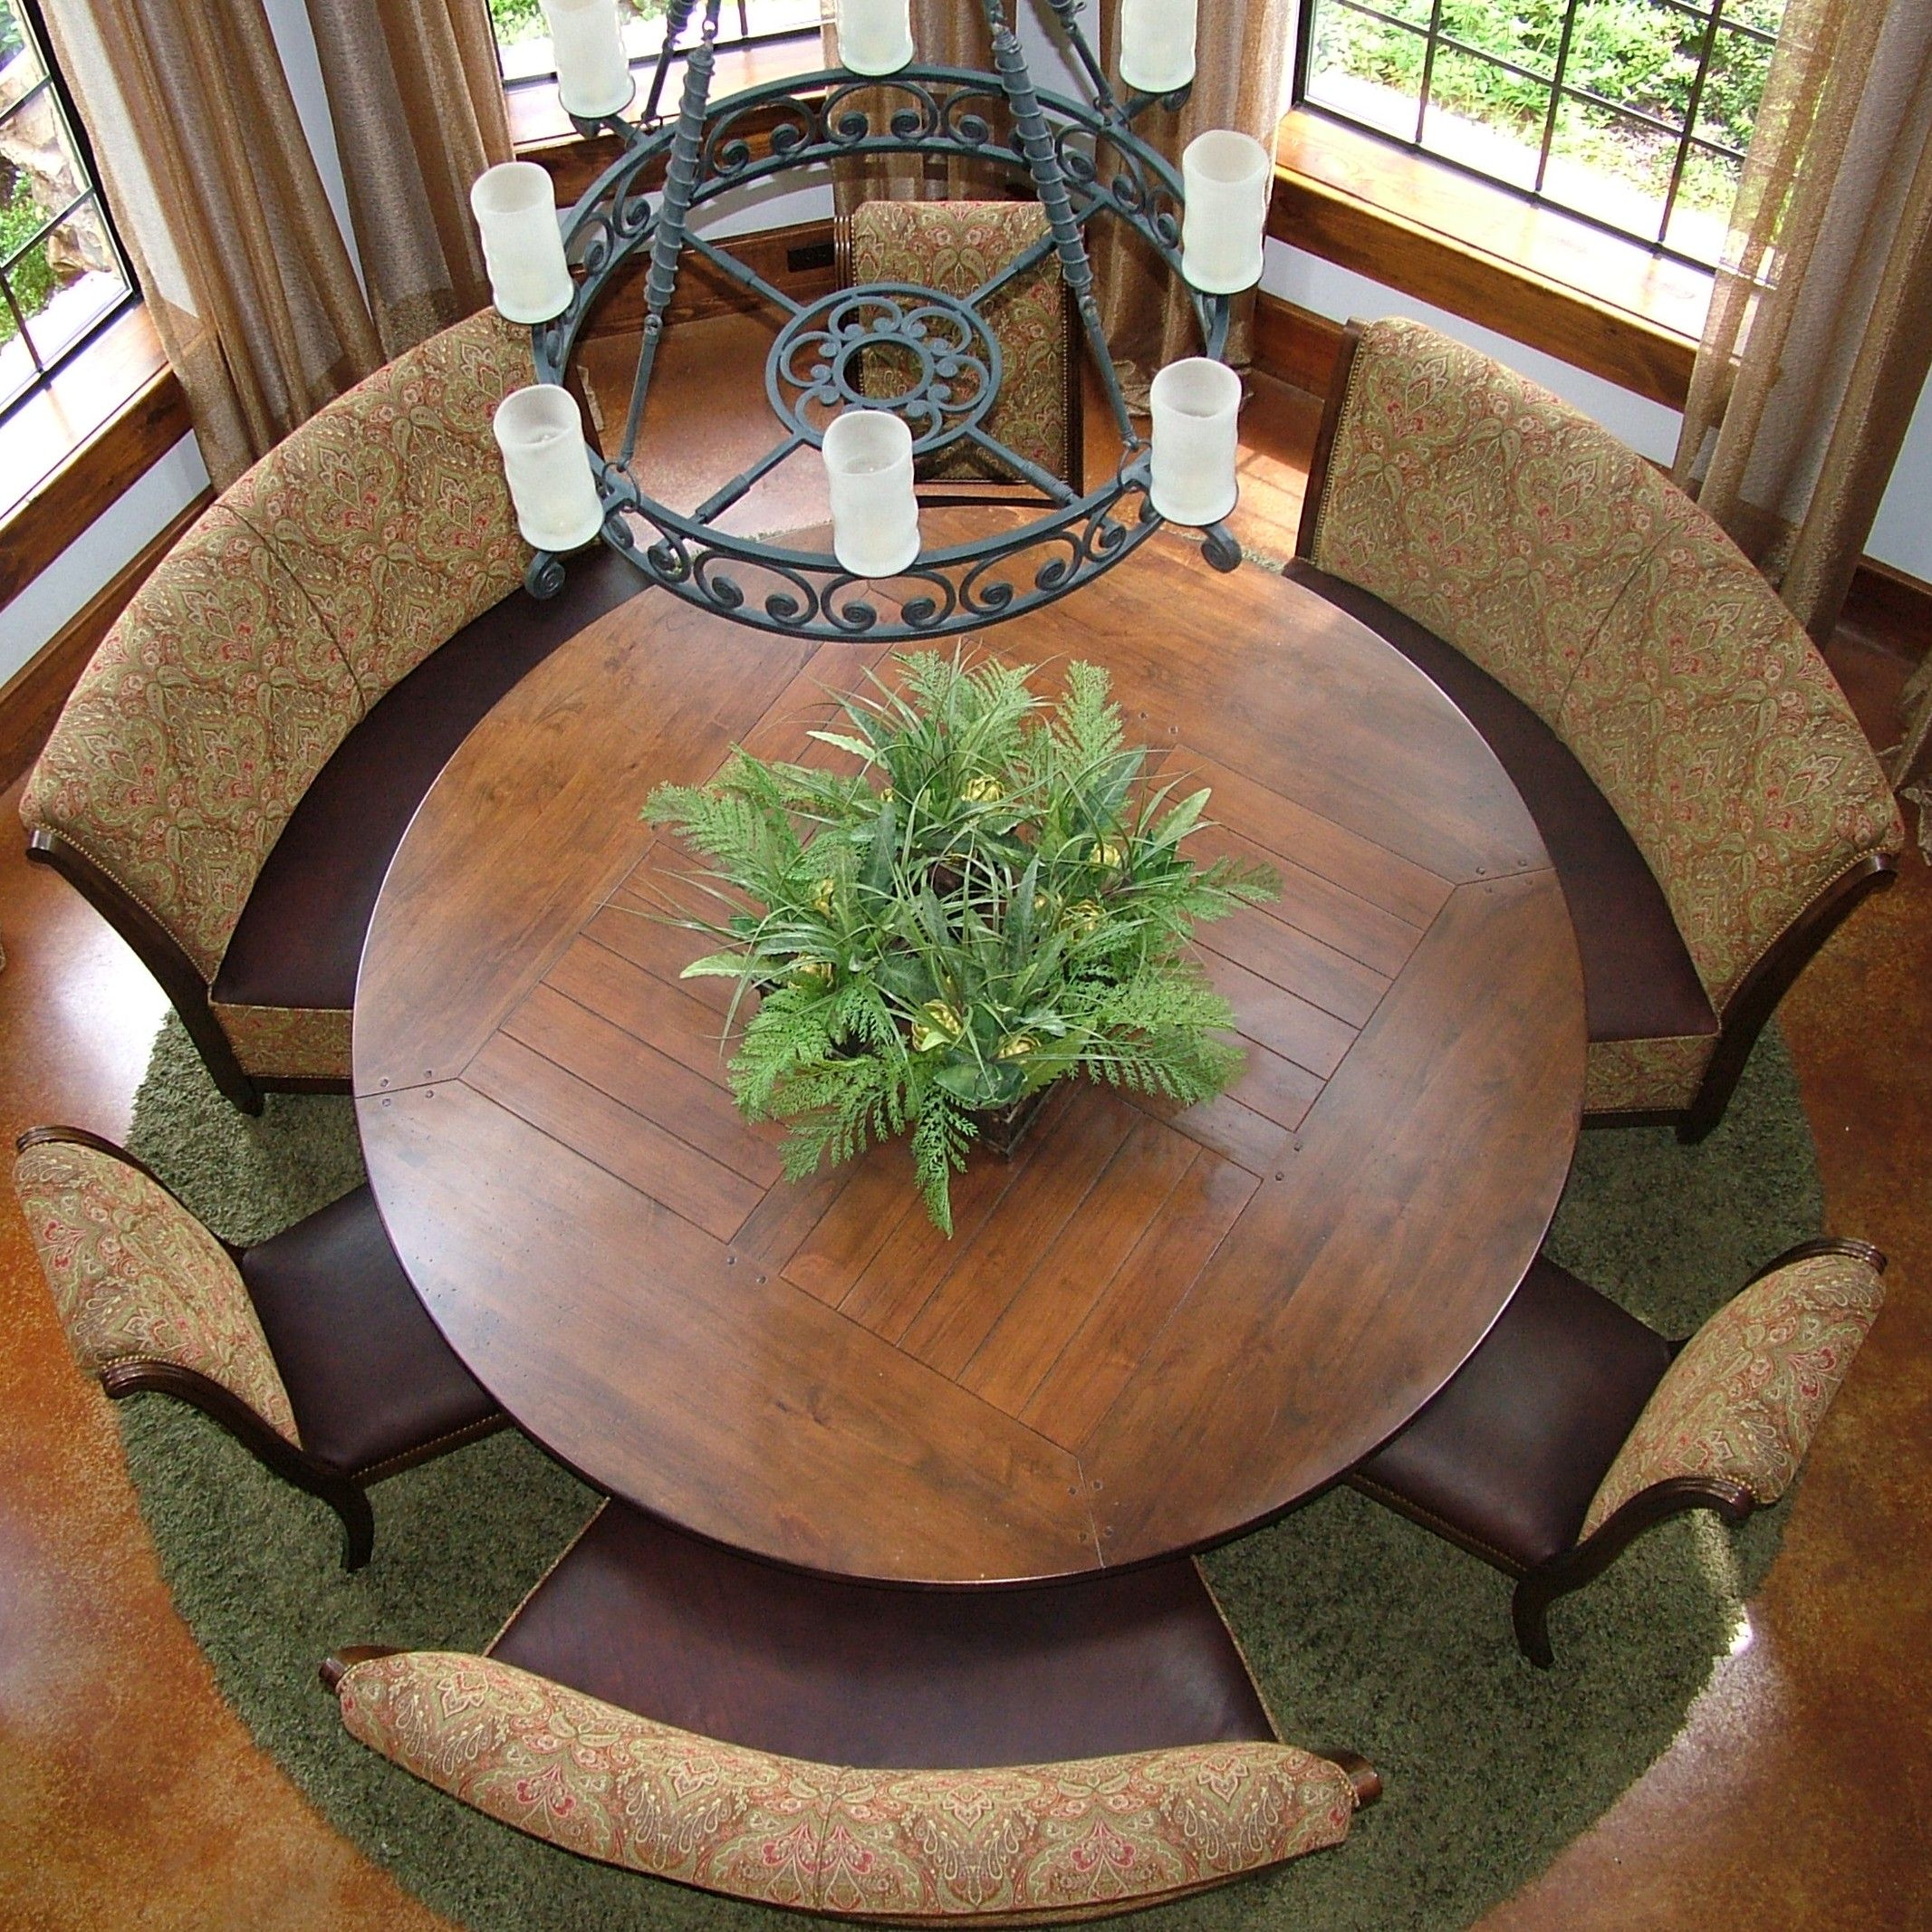 This is one of the nicest round table dining areas I’ve ever seen.